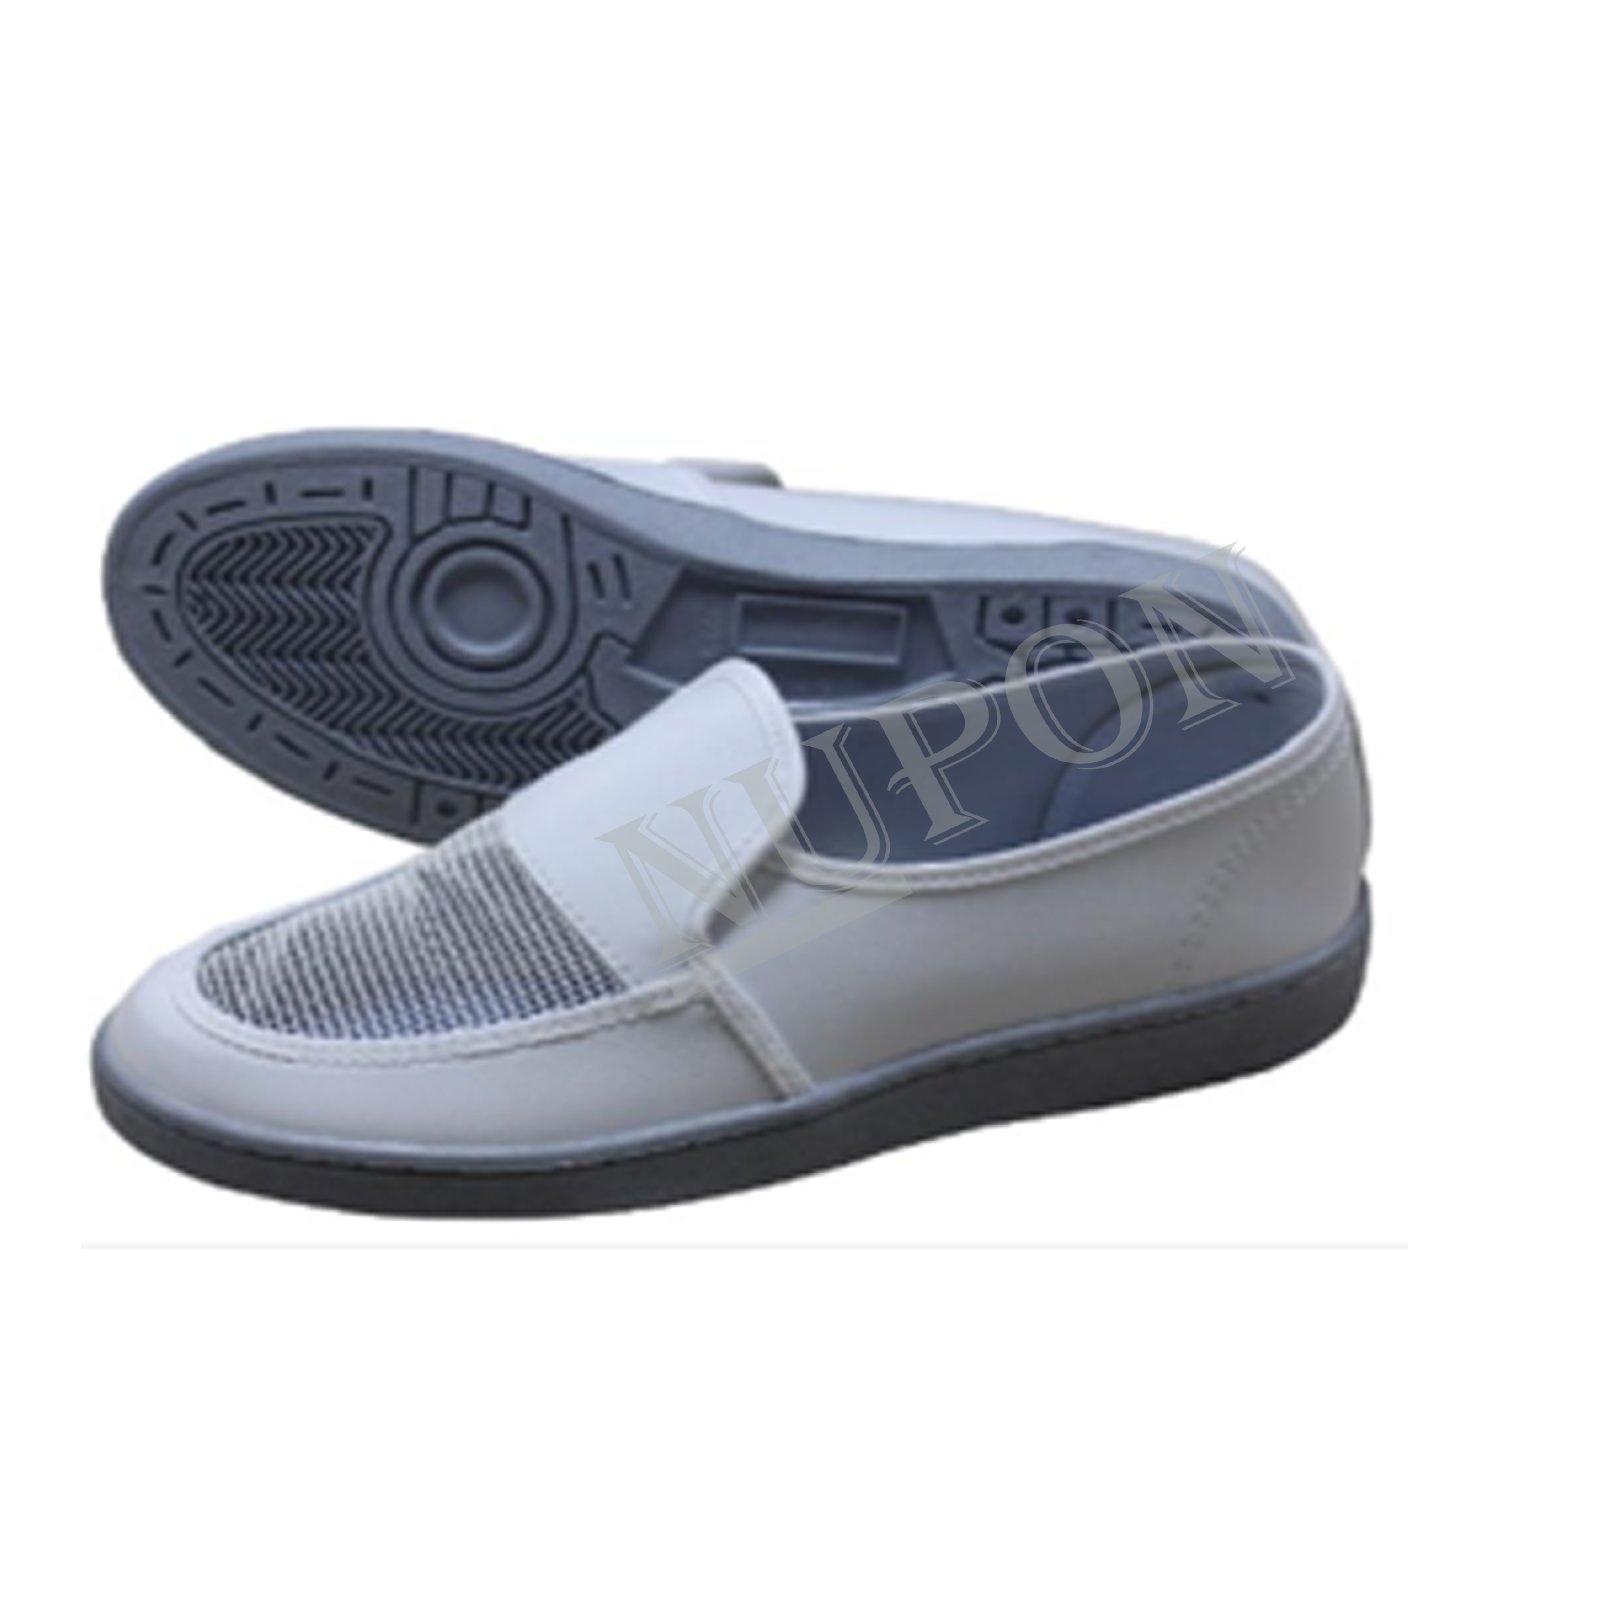 ESD SPU SLIPPER ESD Shoes and Slippers ESD/Cleanroom Products Penang ...